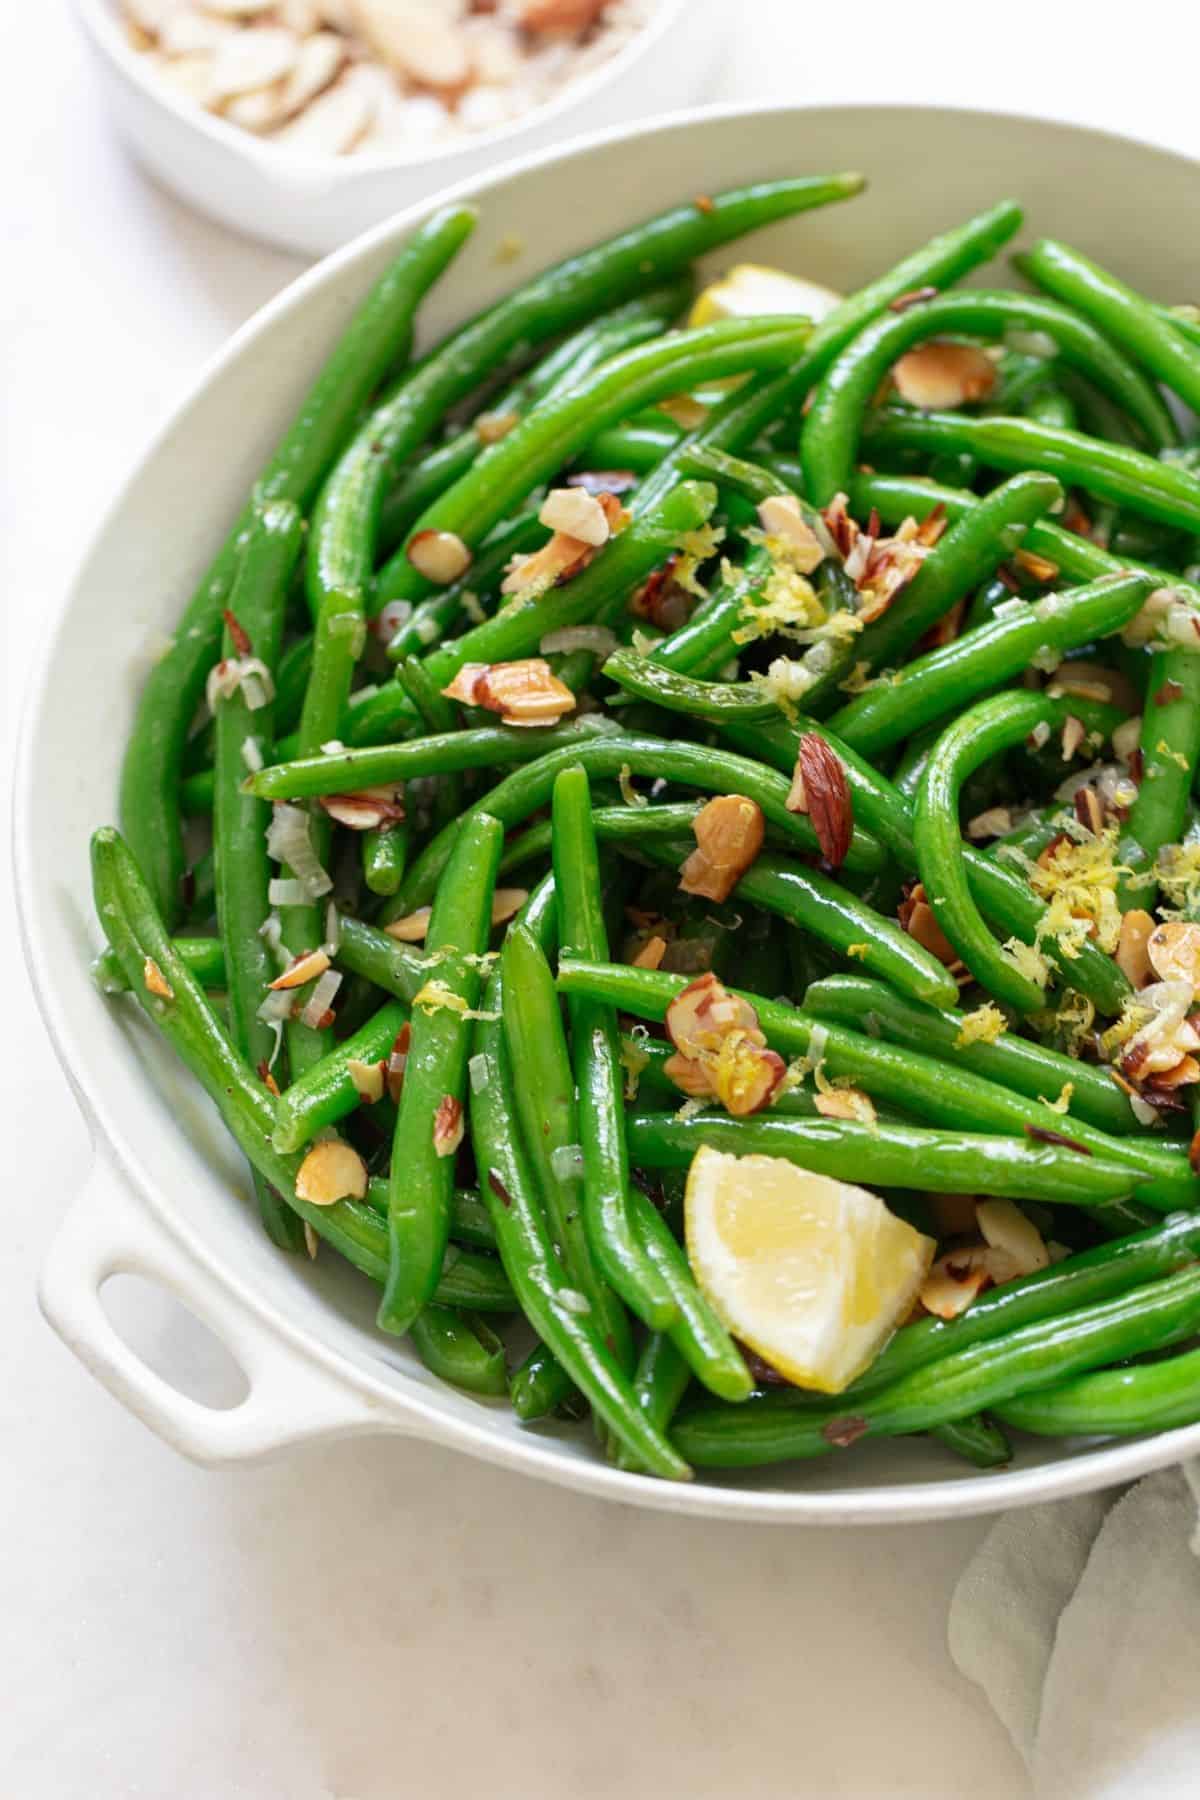 green beans topped with almonds and lemon wedges